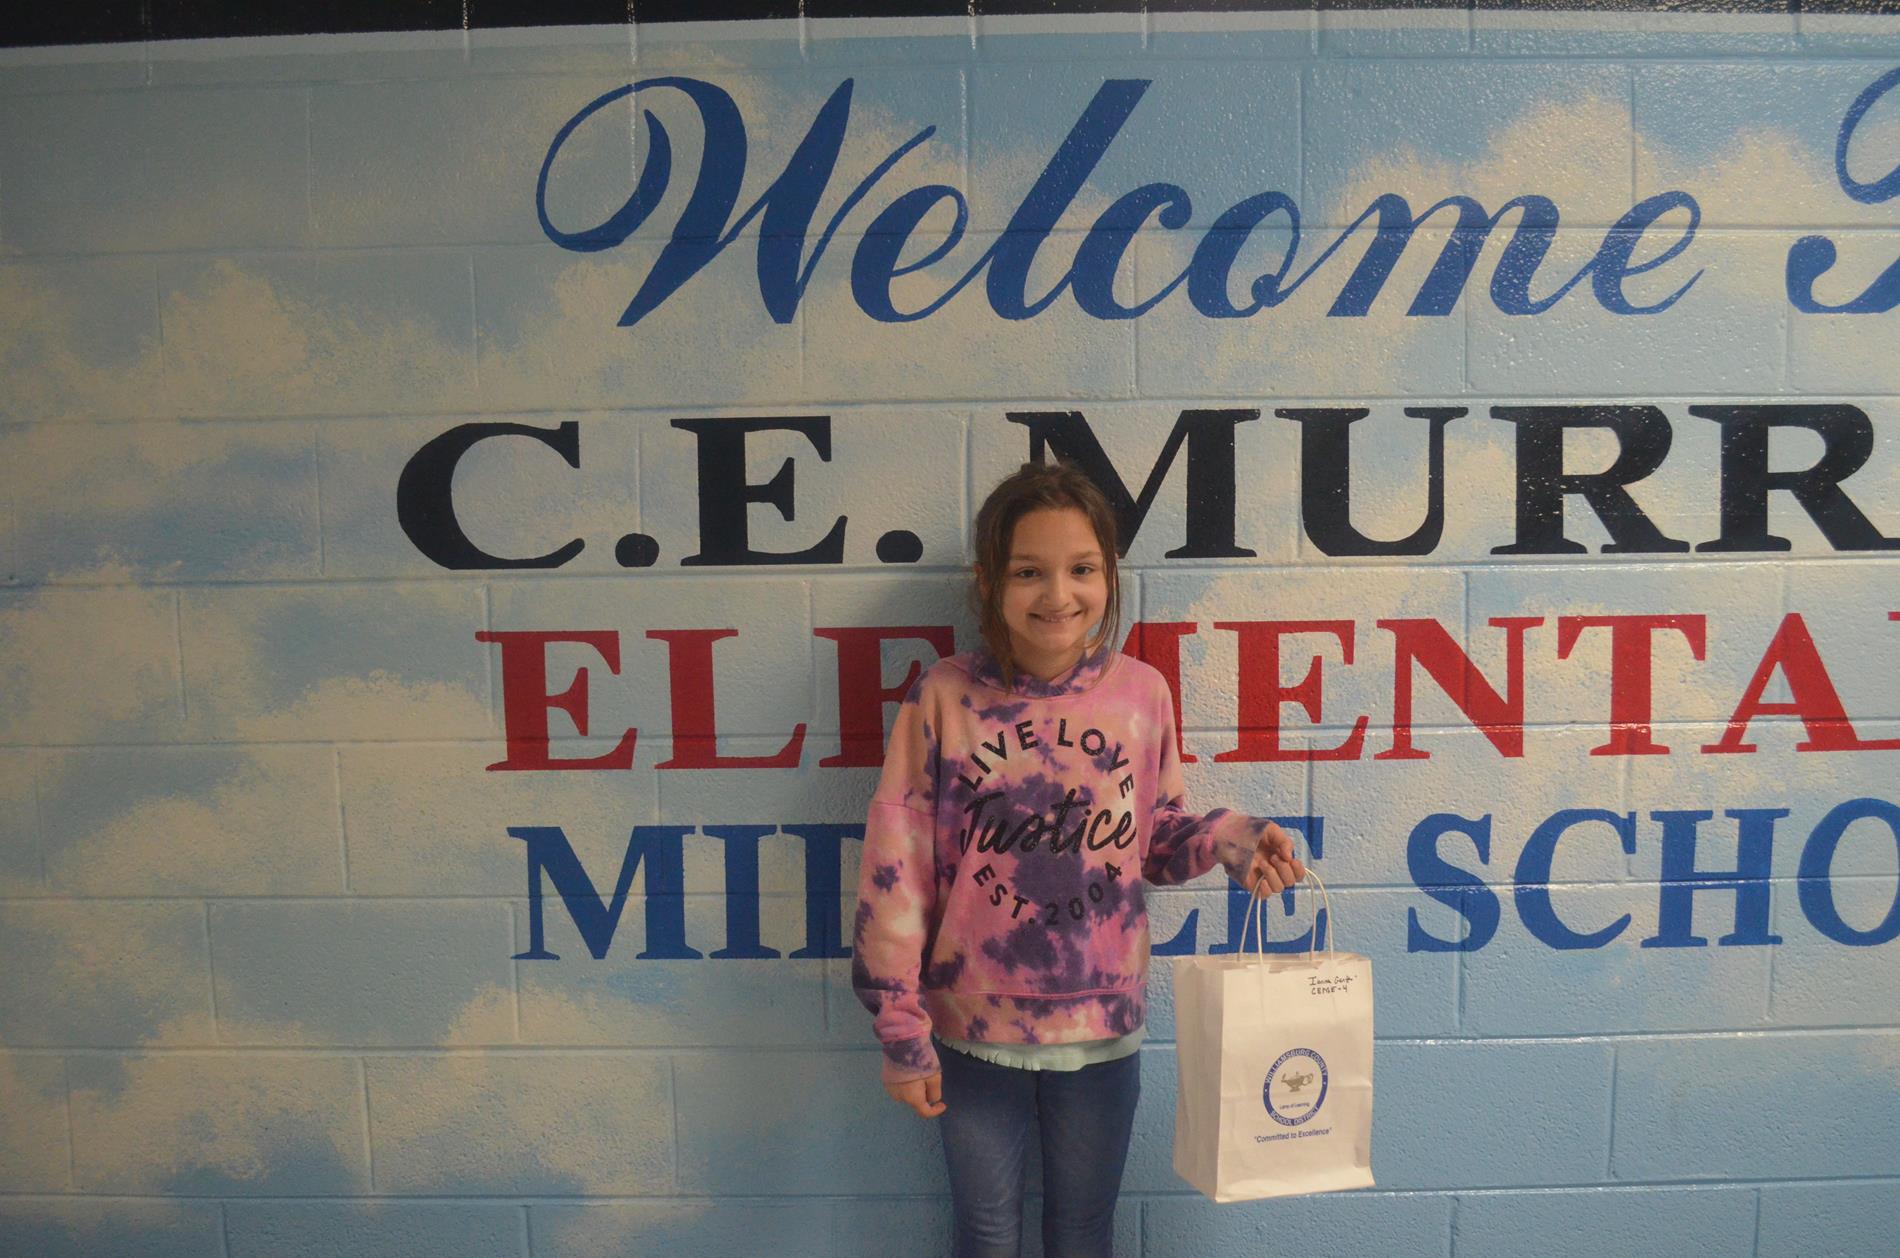 welcome to c.e. murray elementary middle school. student standing in front of wall mural holding gift bag